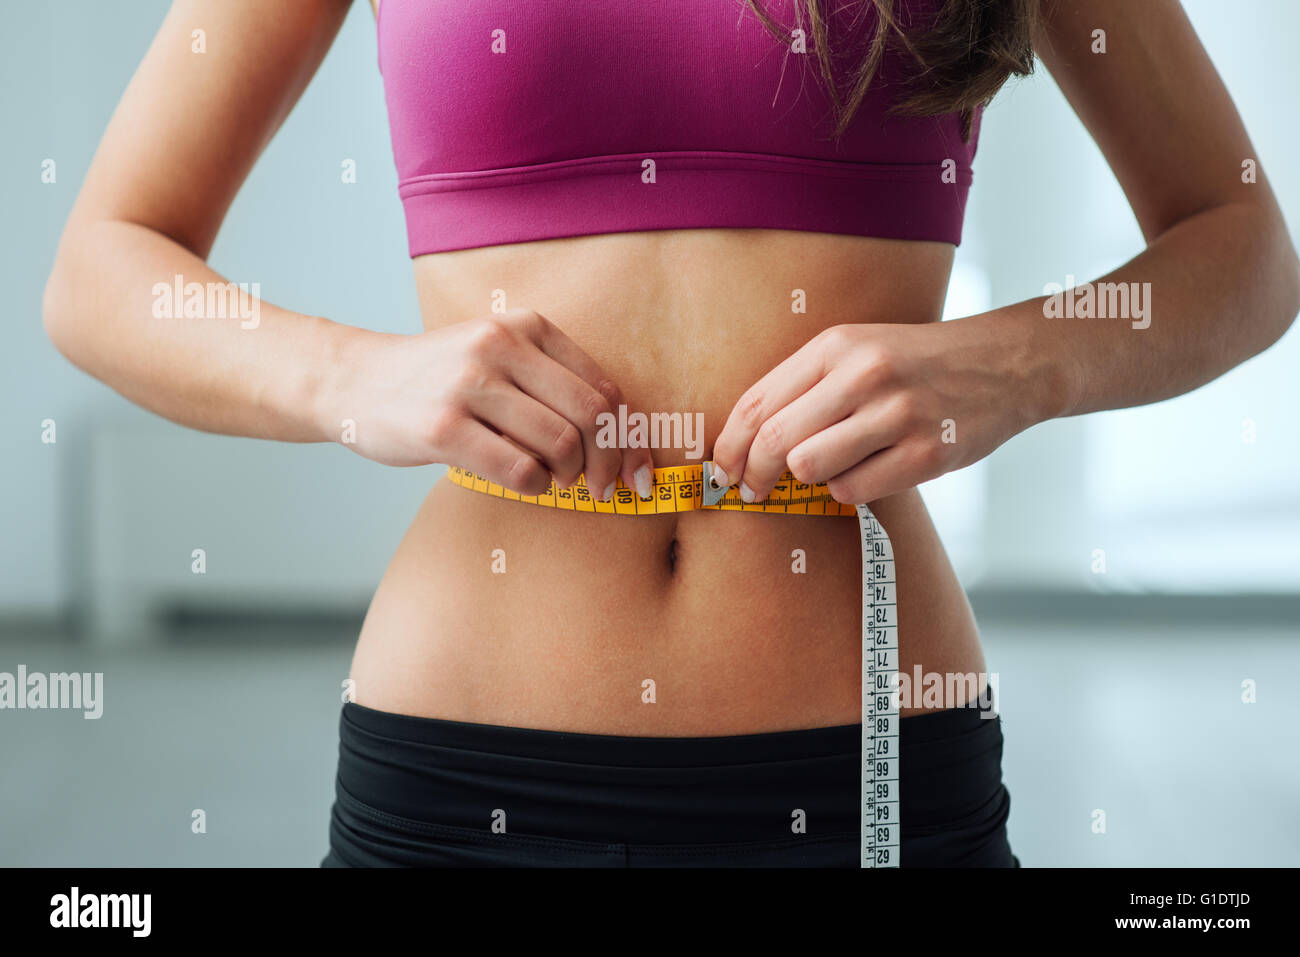 https://c8.alamy.com/comp/G1DTJD/slim-young-woman-measuring-her-thin-waist-with-a-tape-measure-close-G1DTJD.jpg